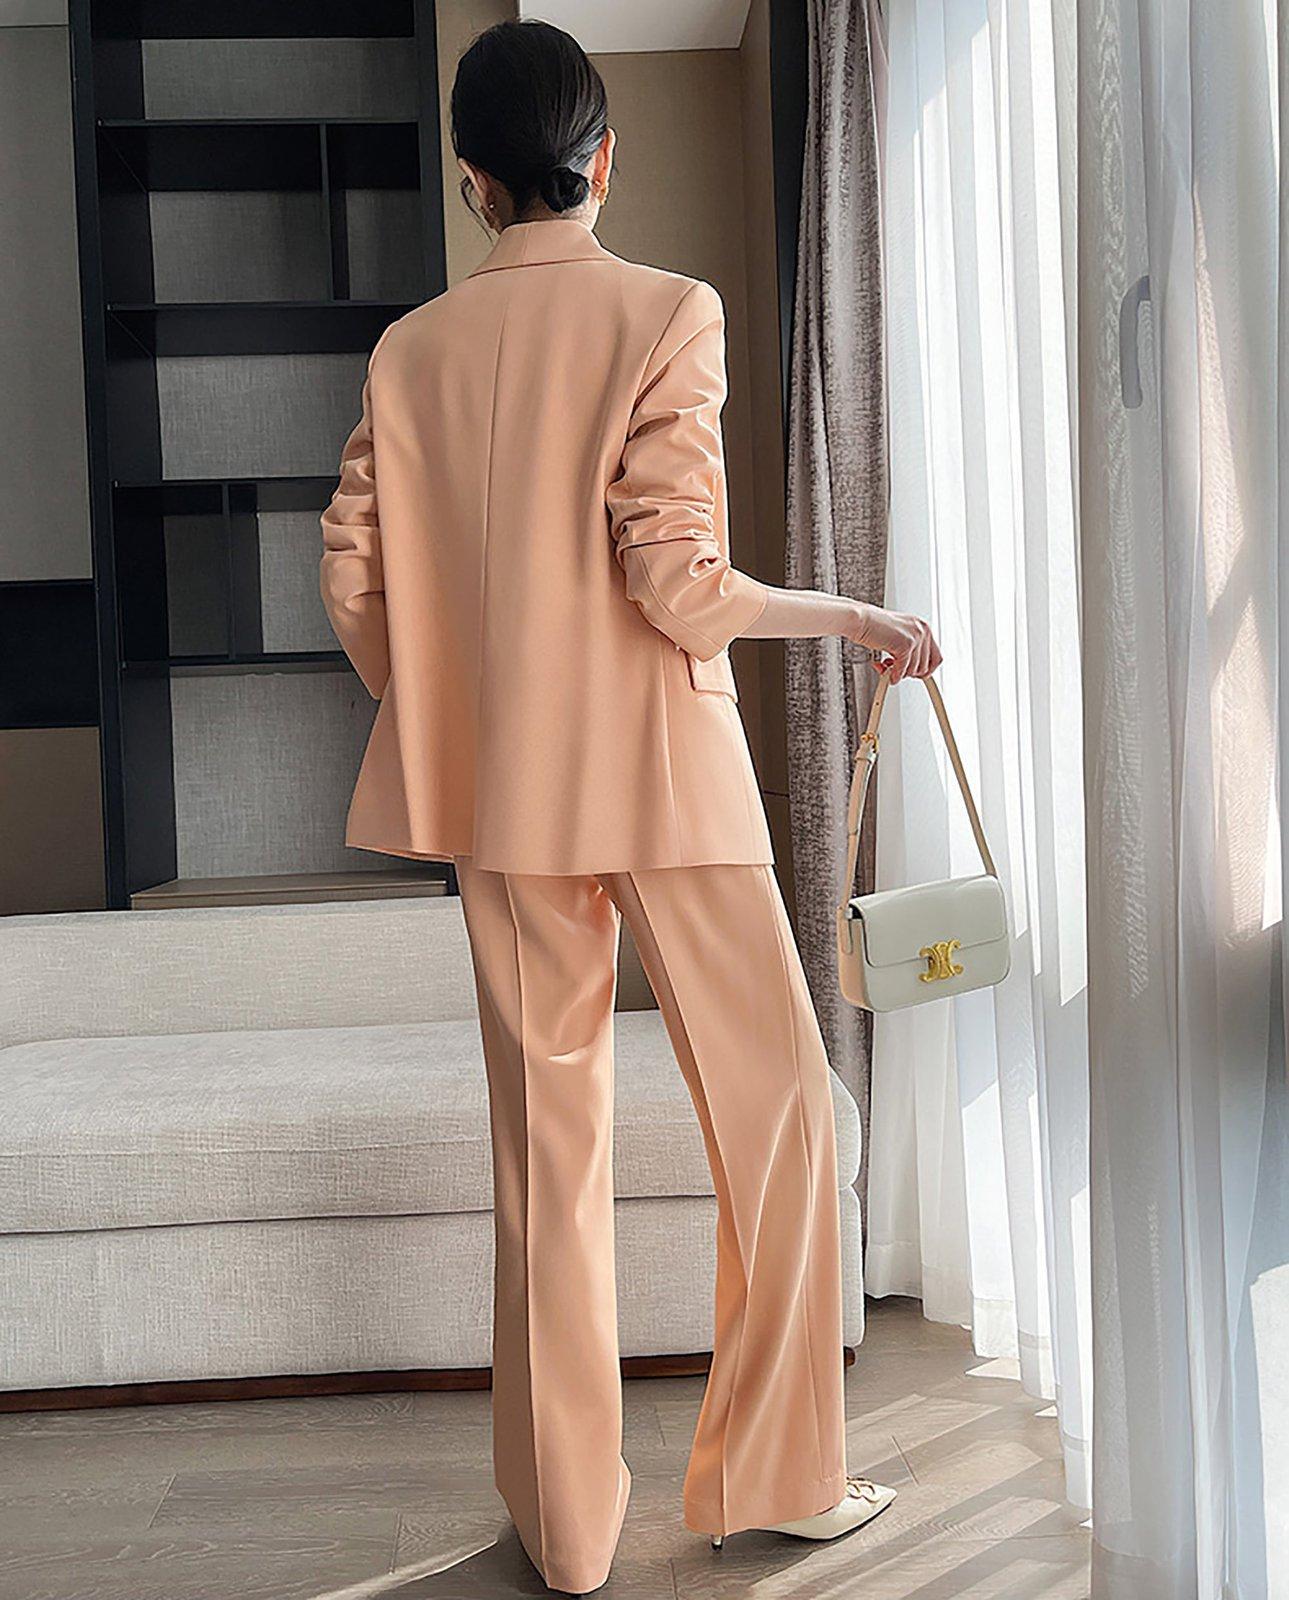 Pink Double Breasted Belted Blazer & Wide Leg Pants Suit Vivian Seven